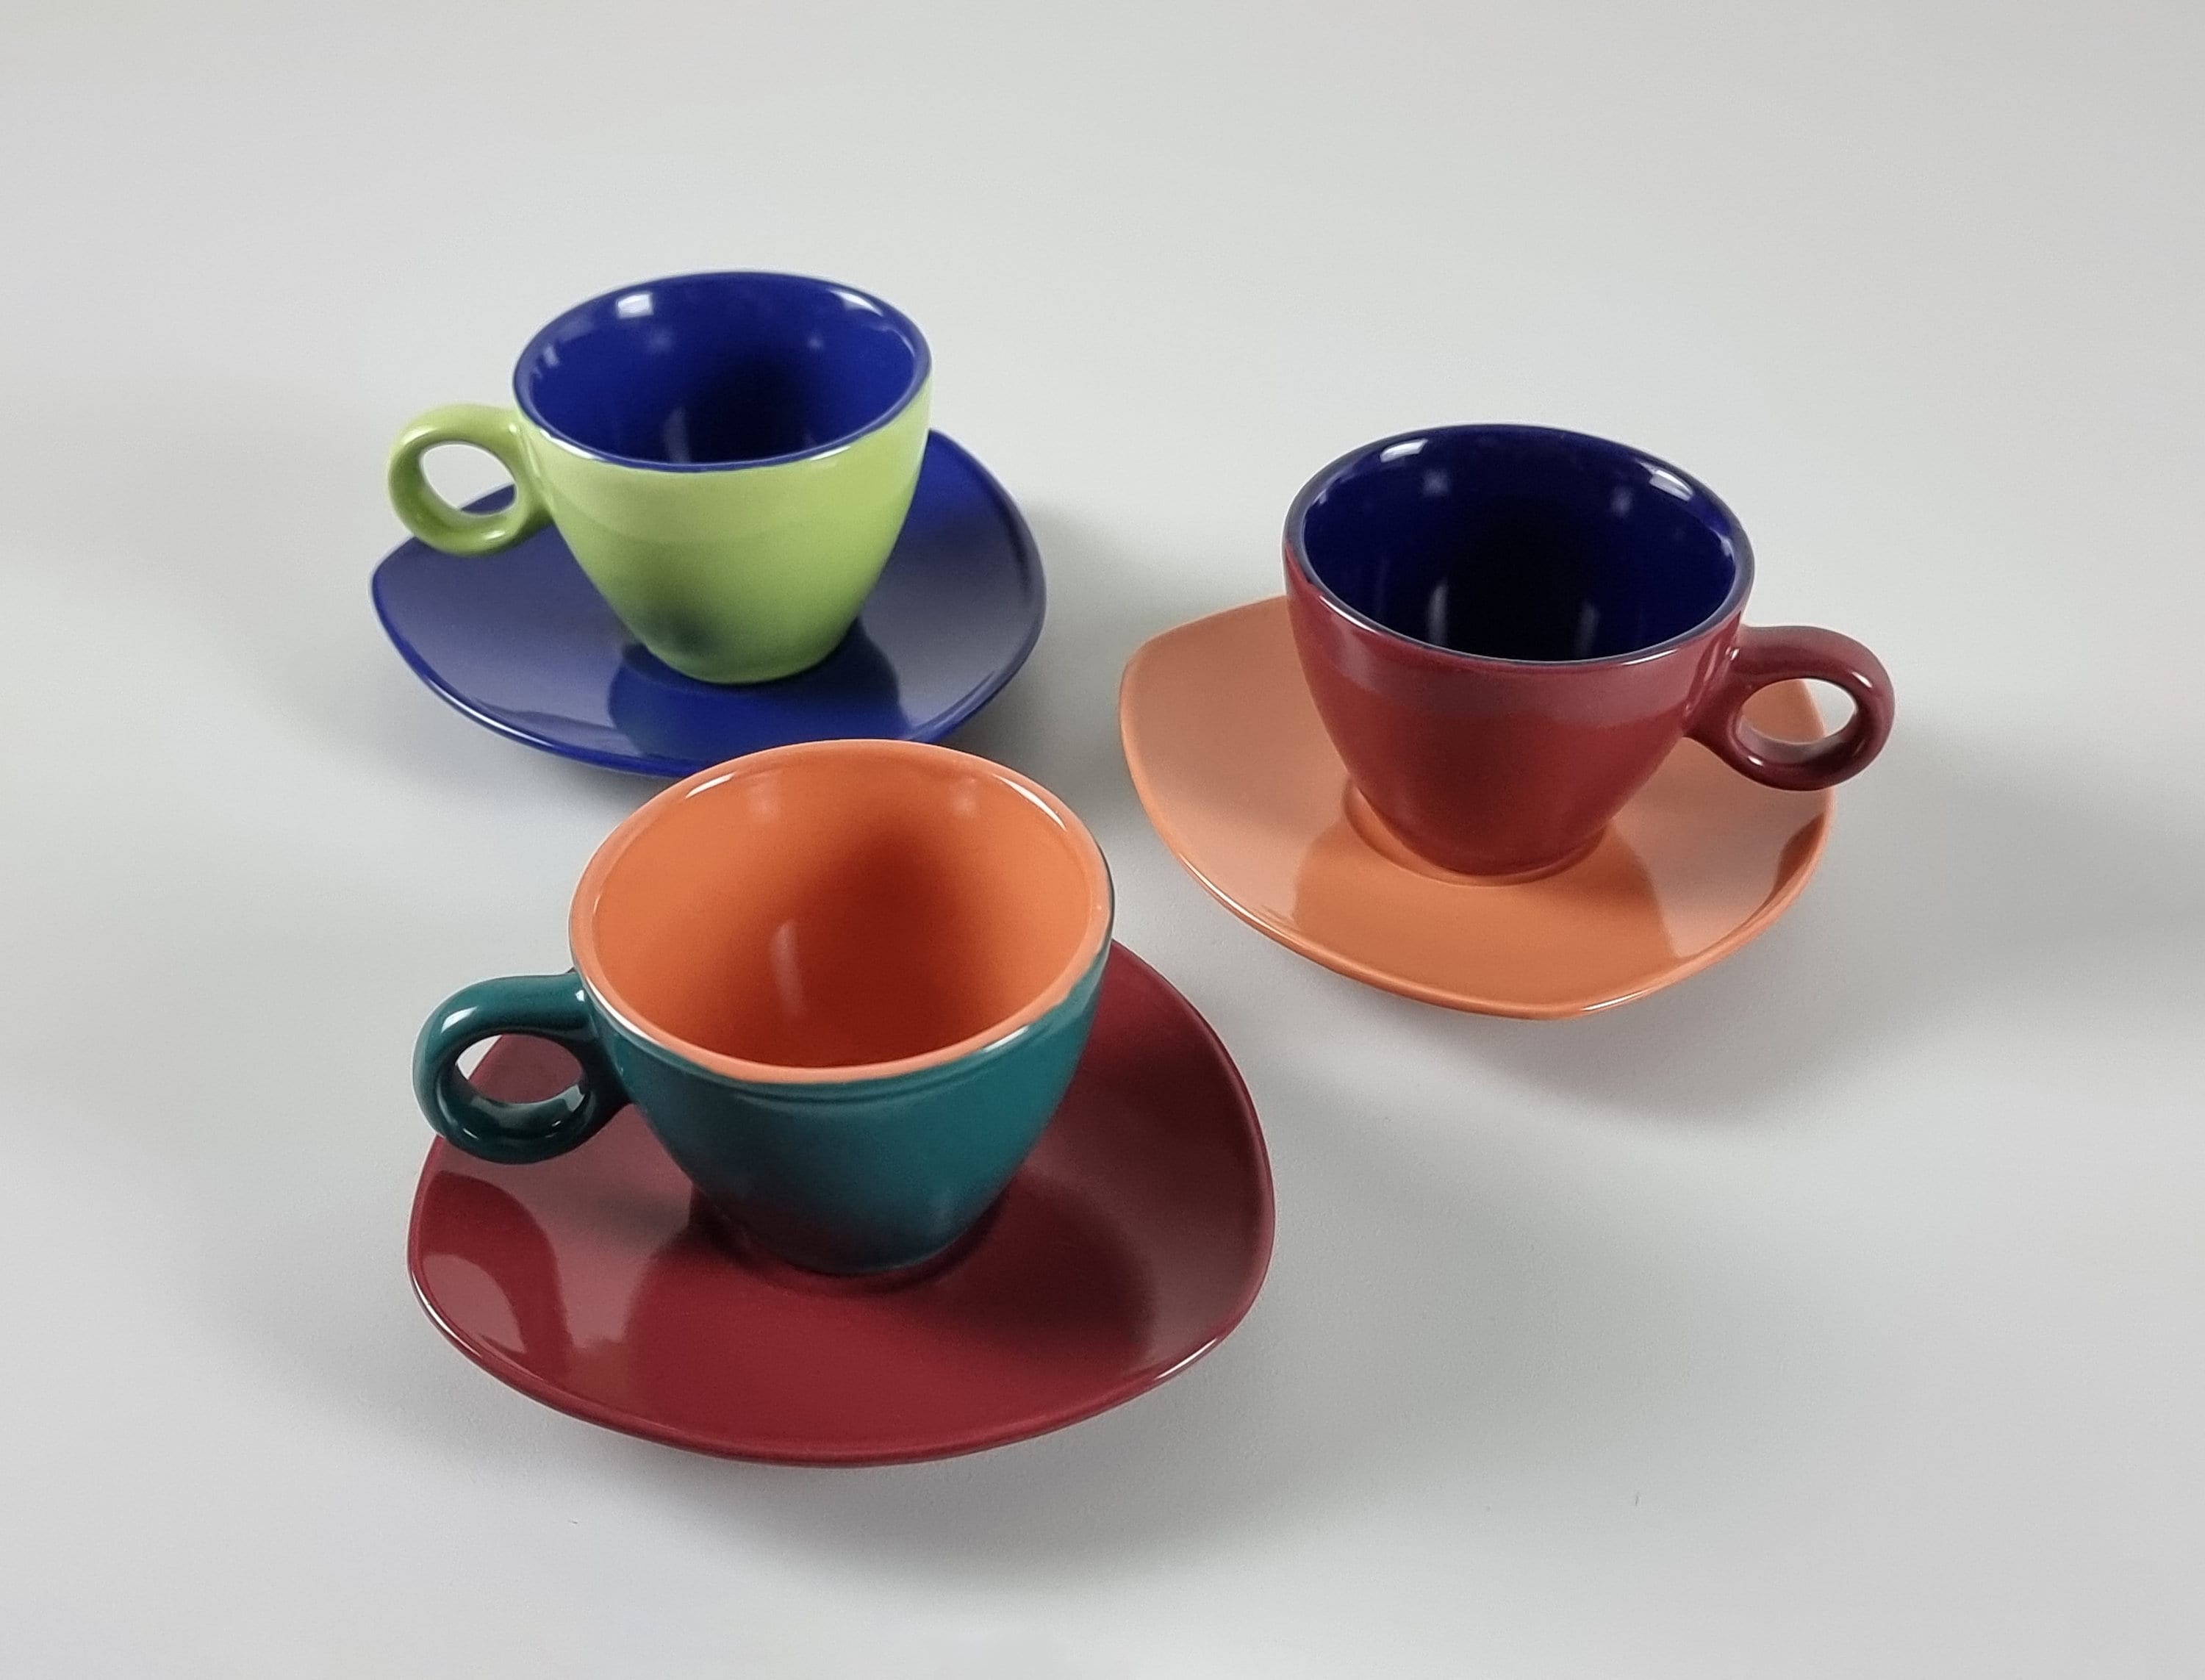 Twelve 12 Espresso Cups Made in Italy 'inoxriv' Brand Porcelain Cups in  Stainless Holders With Spoon and Saucer 